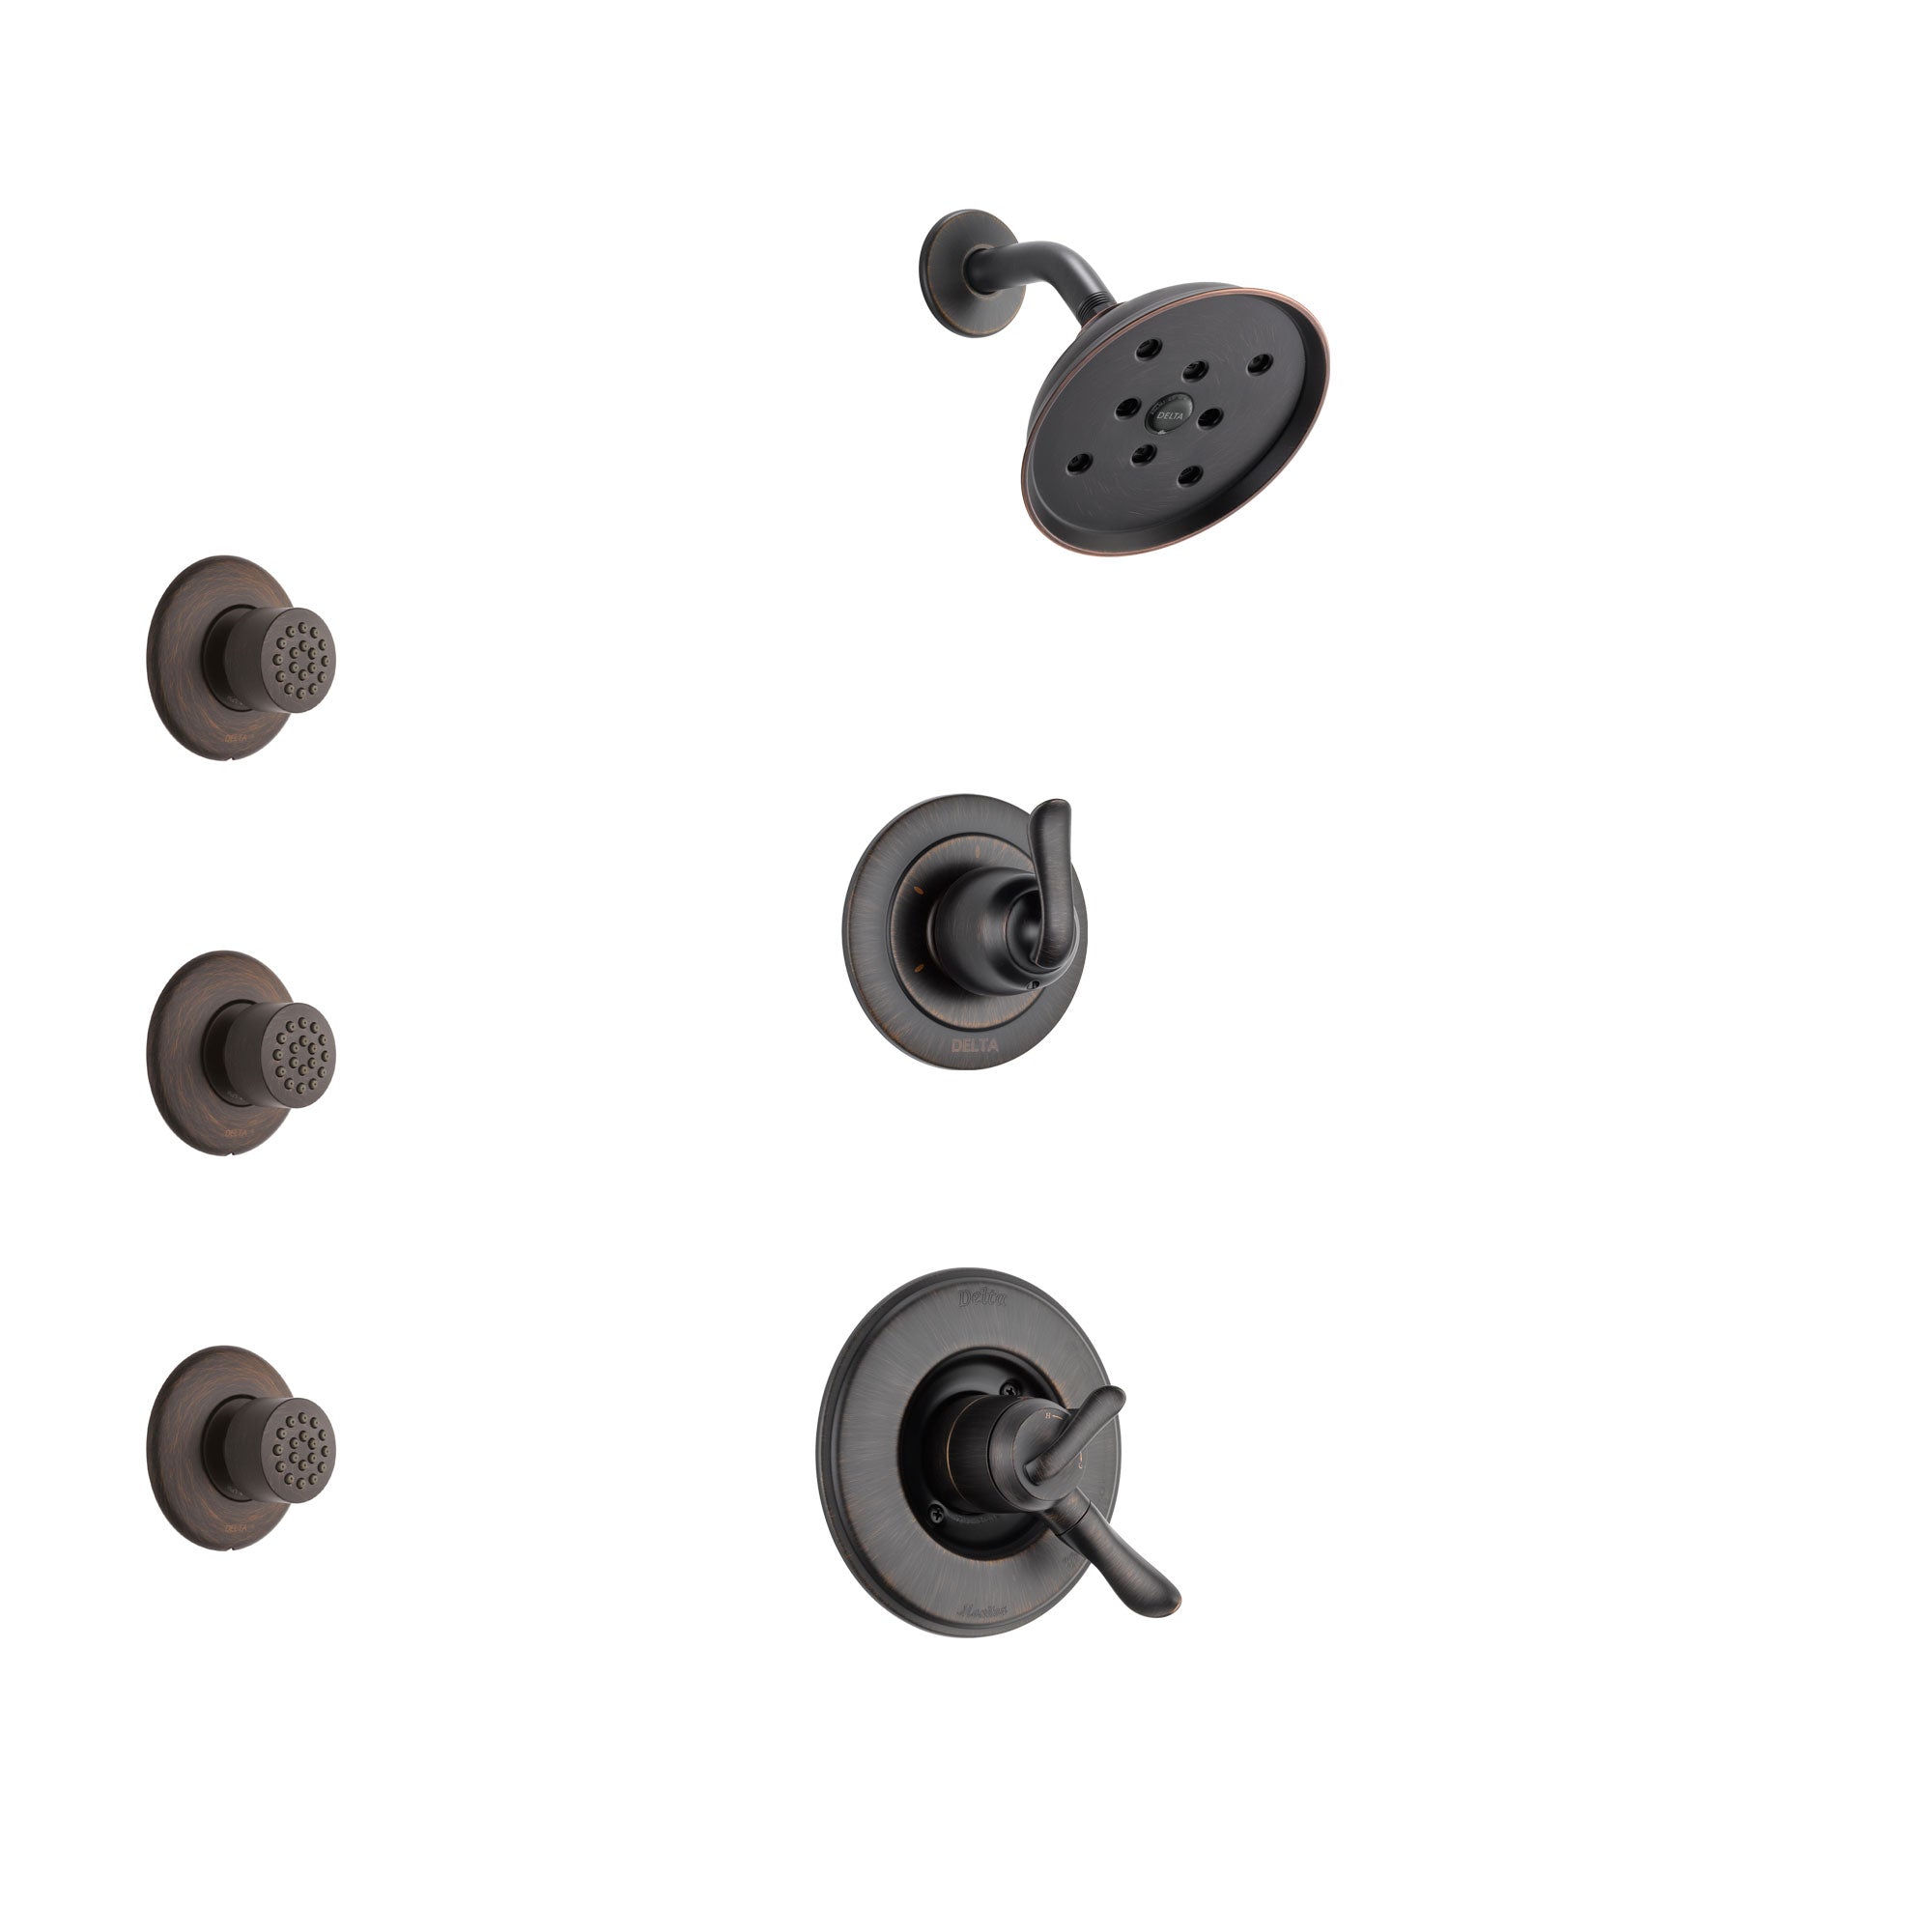 Delta Linden Venetian Bronze Finish Shower System with Dual Control Handle, 3-Setting Diverter, Showerhead, and 3 Body Sprays SS17294RB1